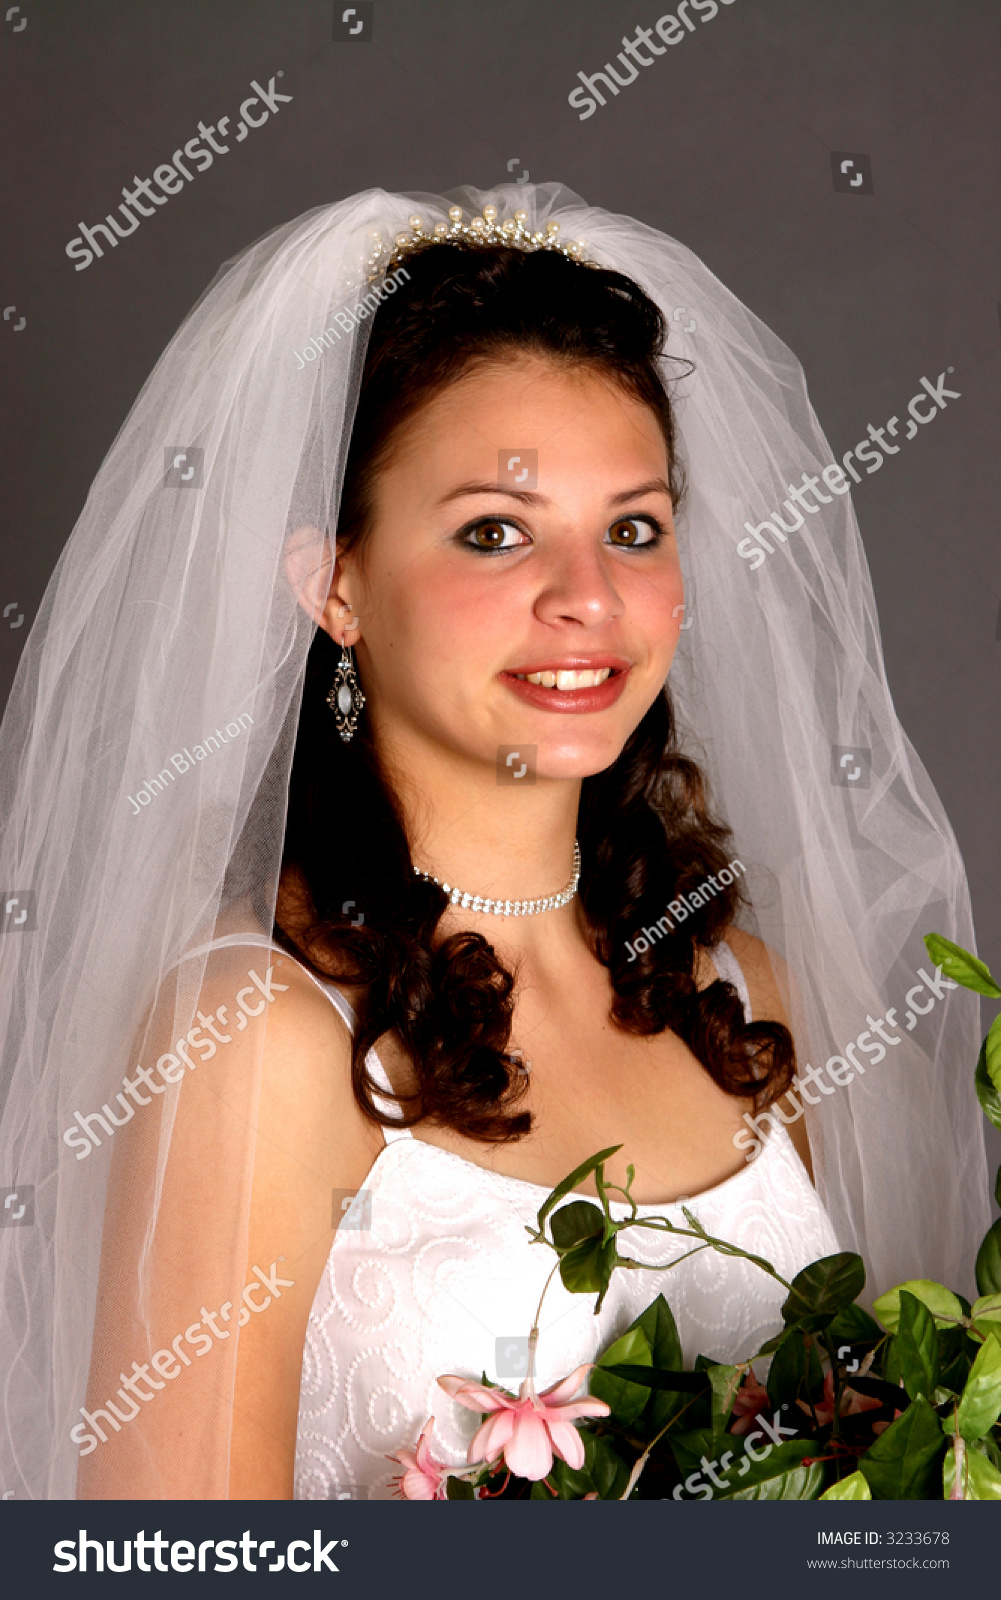 Teenage Bride In Wedding Dress And Veil And Wearing Rhinestone Necklace ...